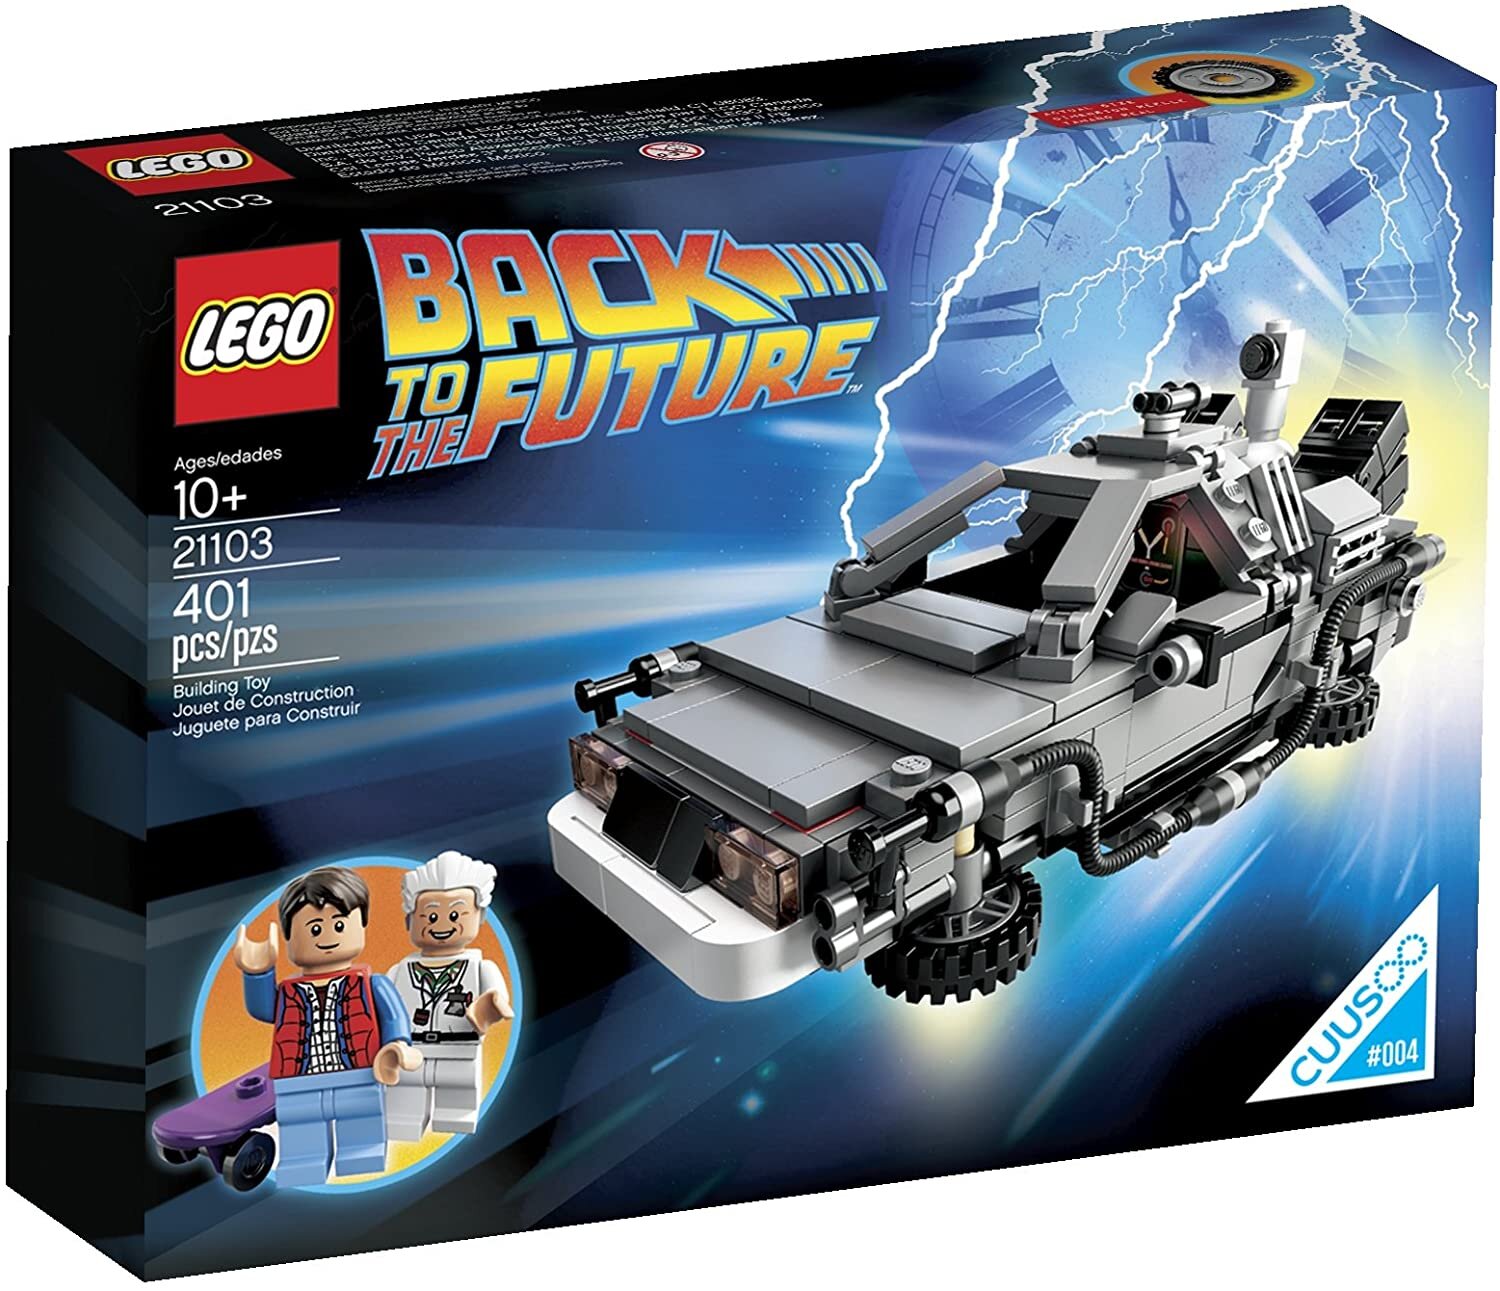 LEGO 21103 - Back to the future.jpg